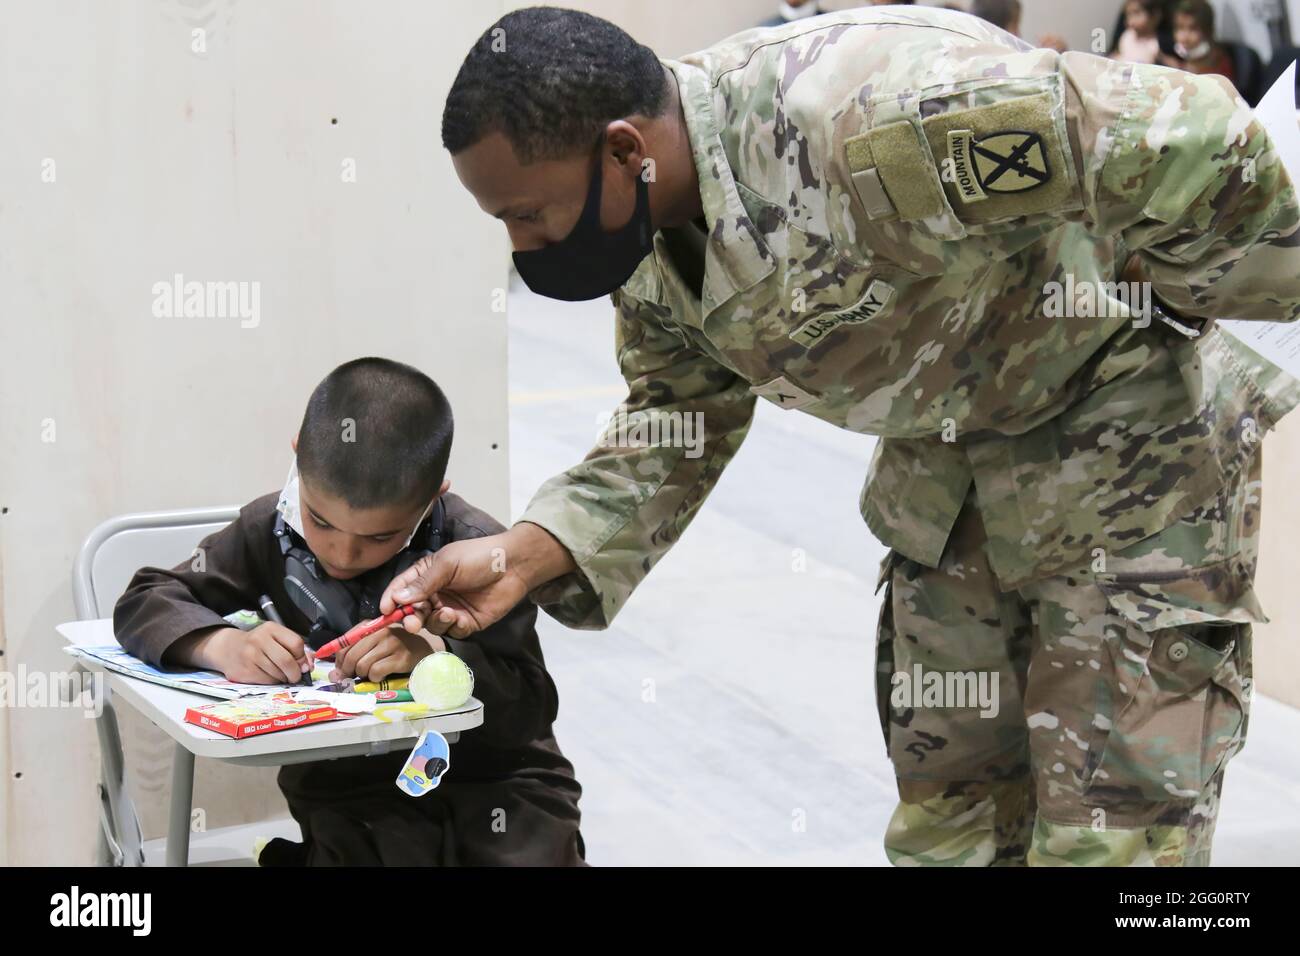 A U.S. Army Soldier and Afghan evacuee boy color together at Camp Buehring, Kuwait, Aug. 25, 2021. Soldiers joined in activities with the children as their families went through arrival processes at the facility. (U.S. Army photo by Sgt. Marc Loi) Stock Photo